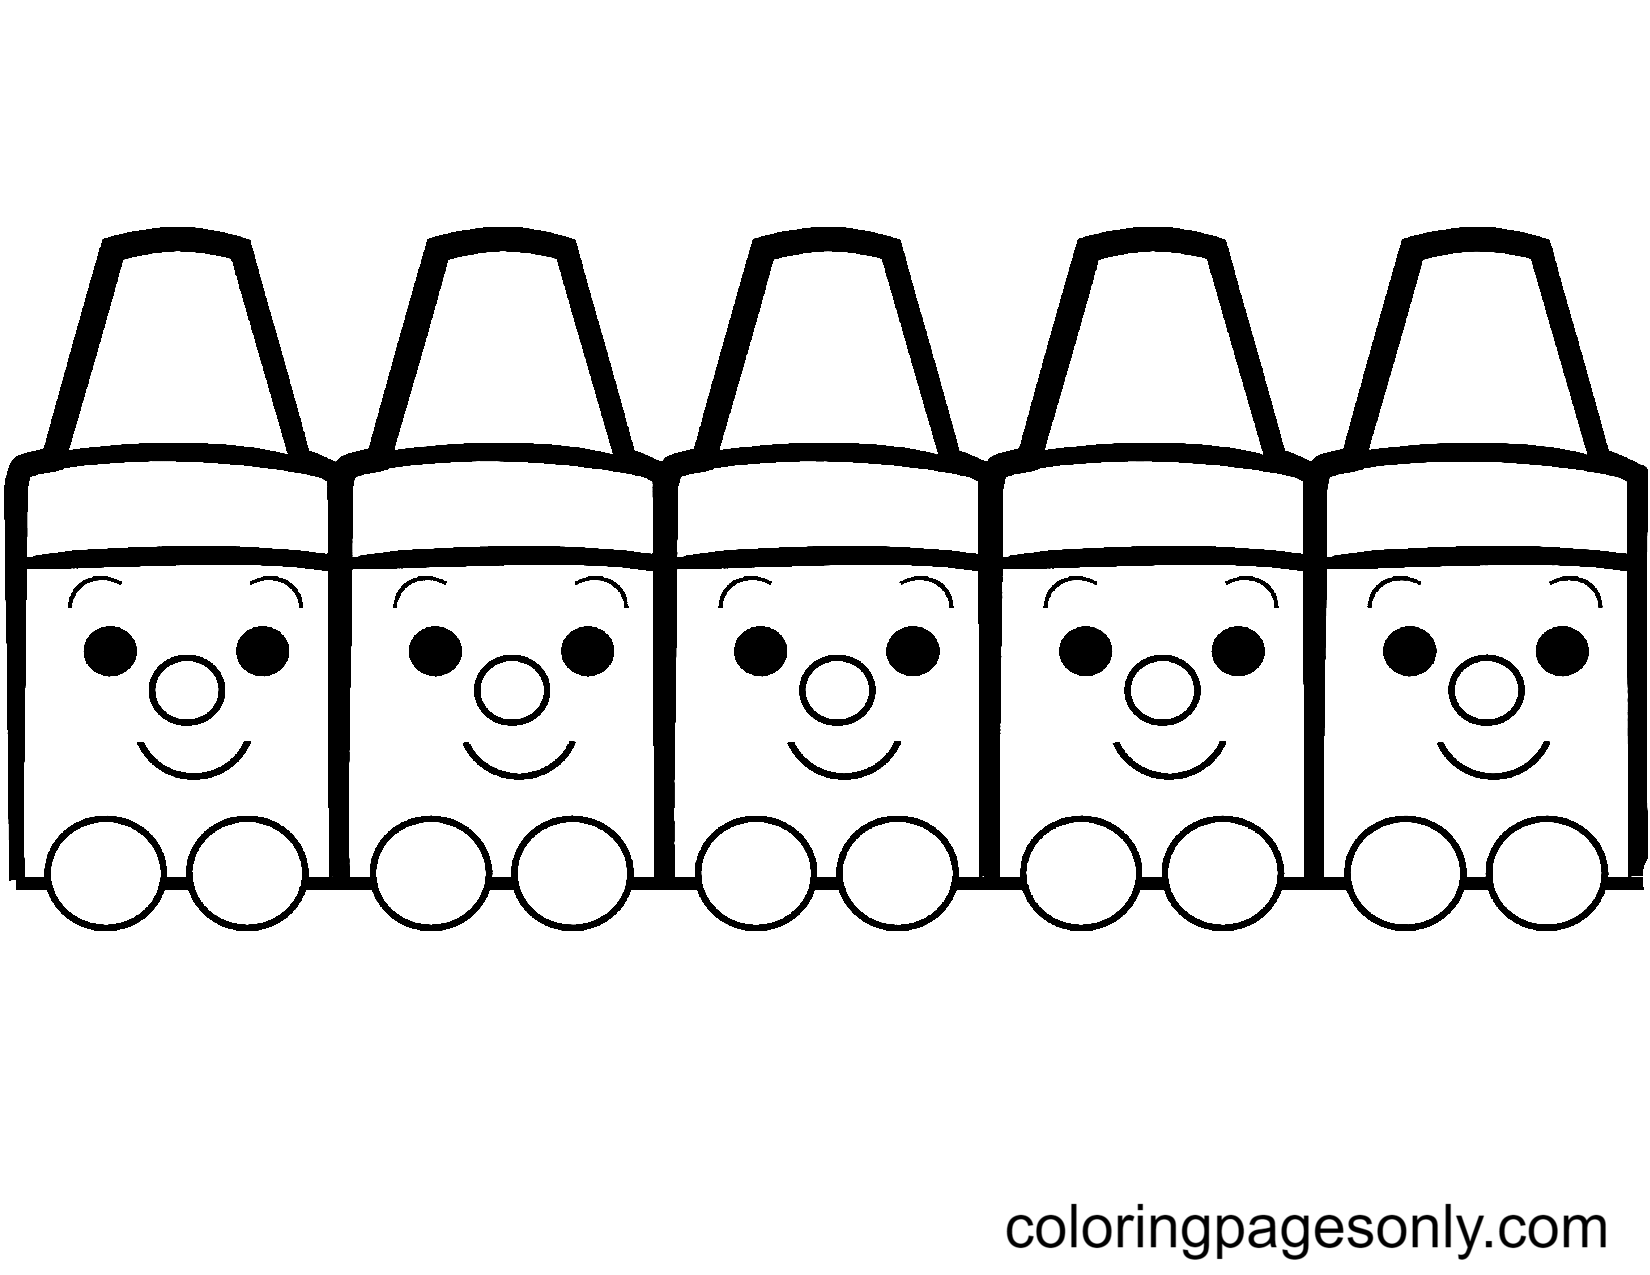 Cute Crayons Coloring Page